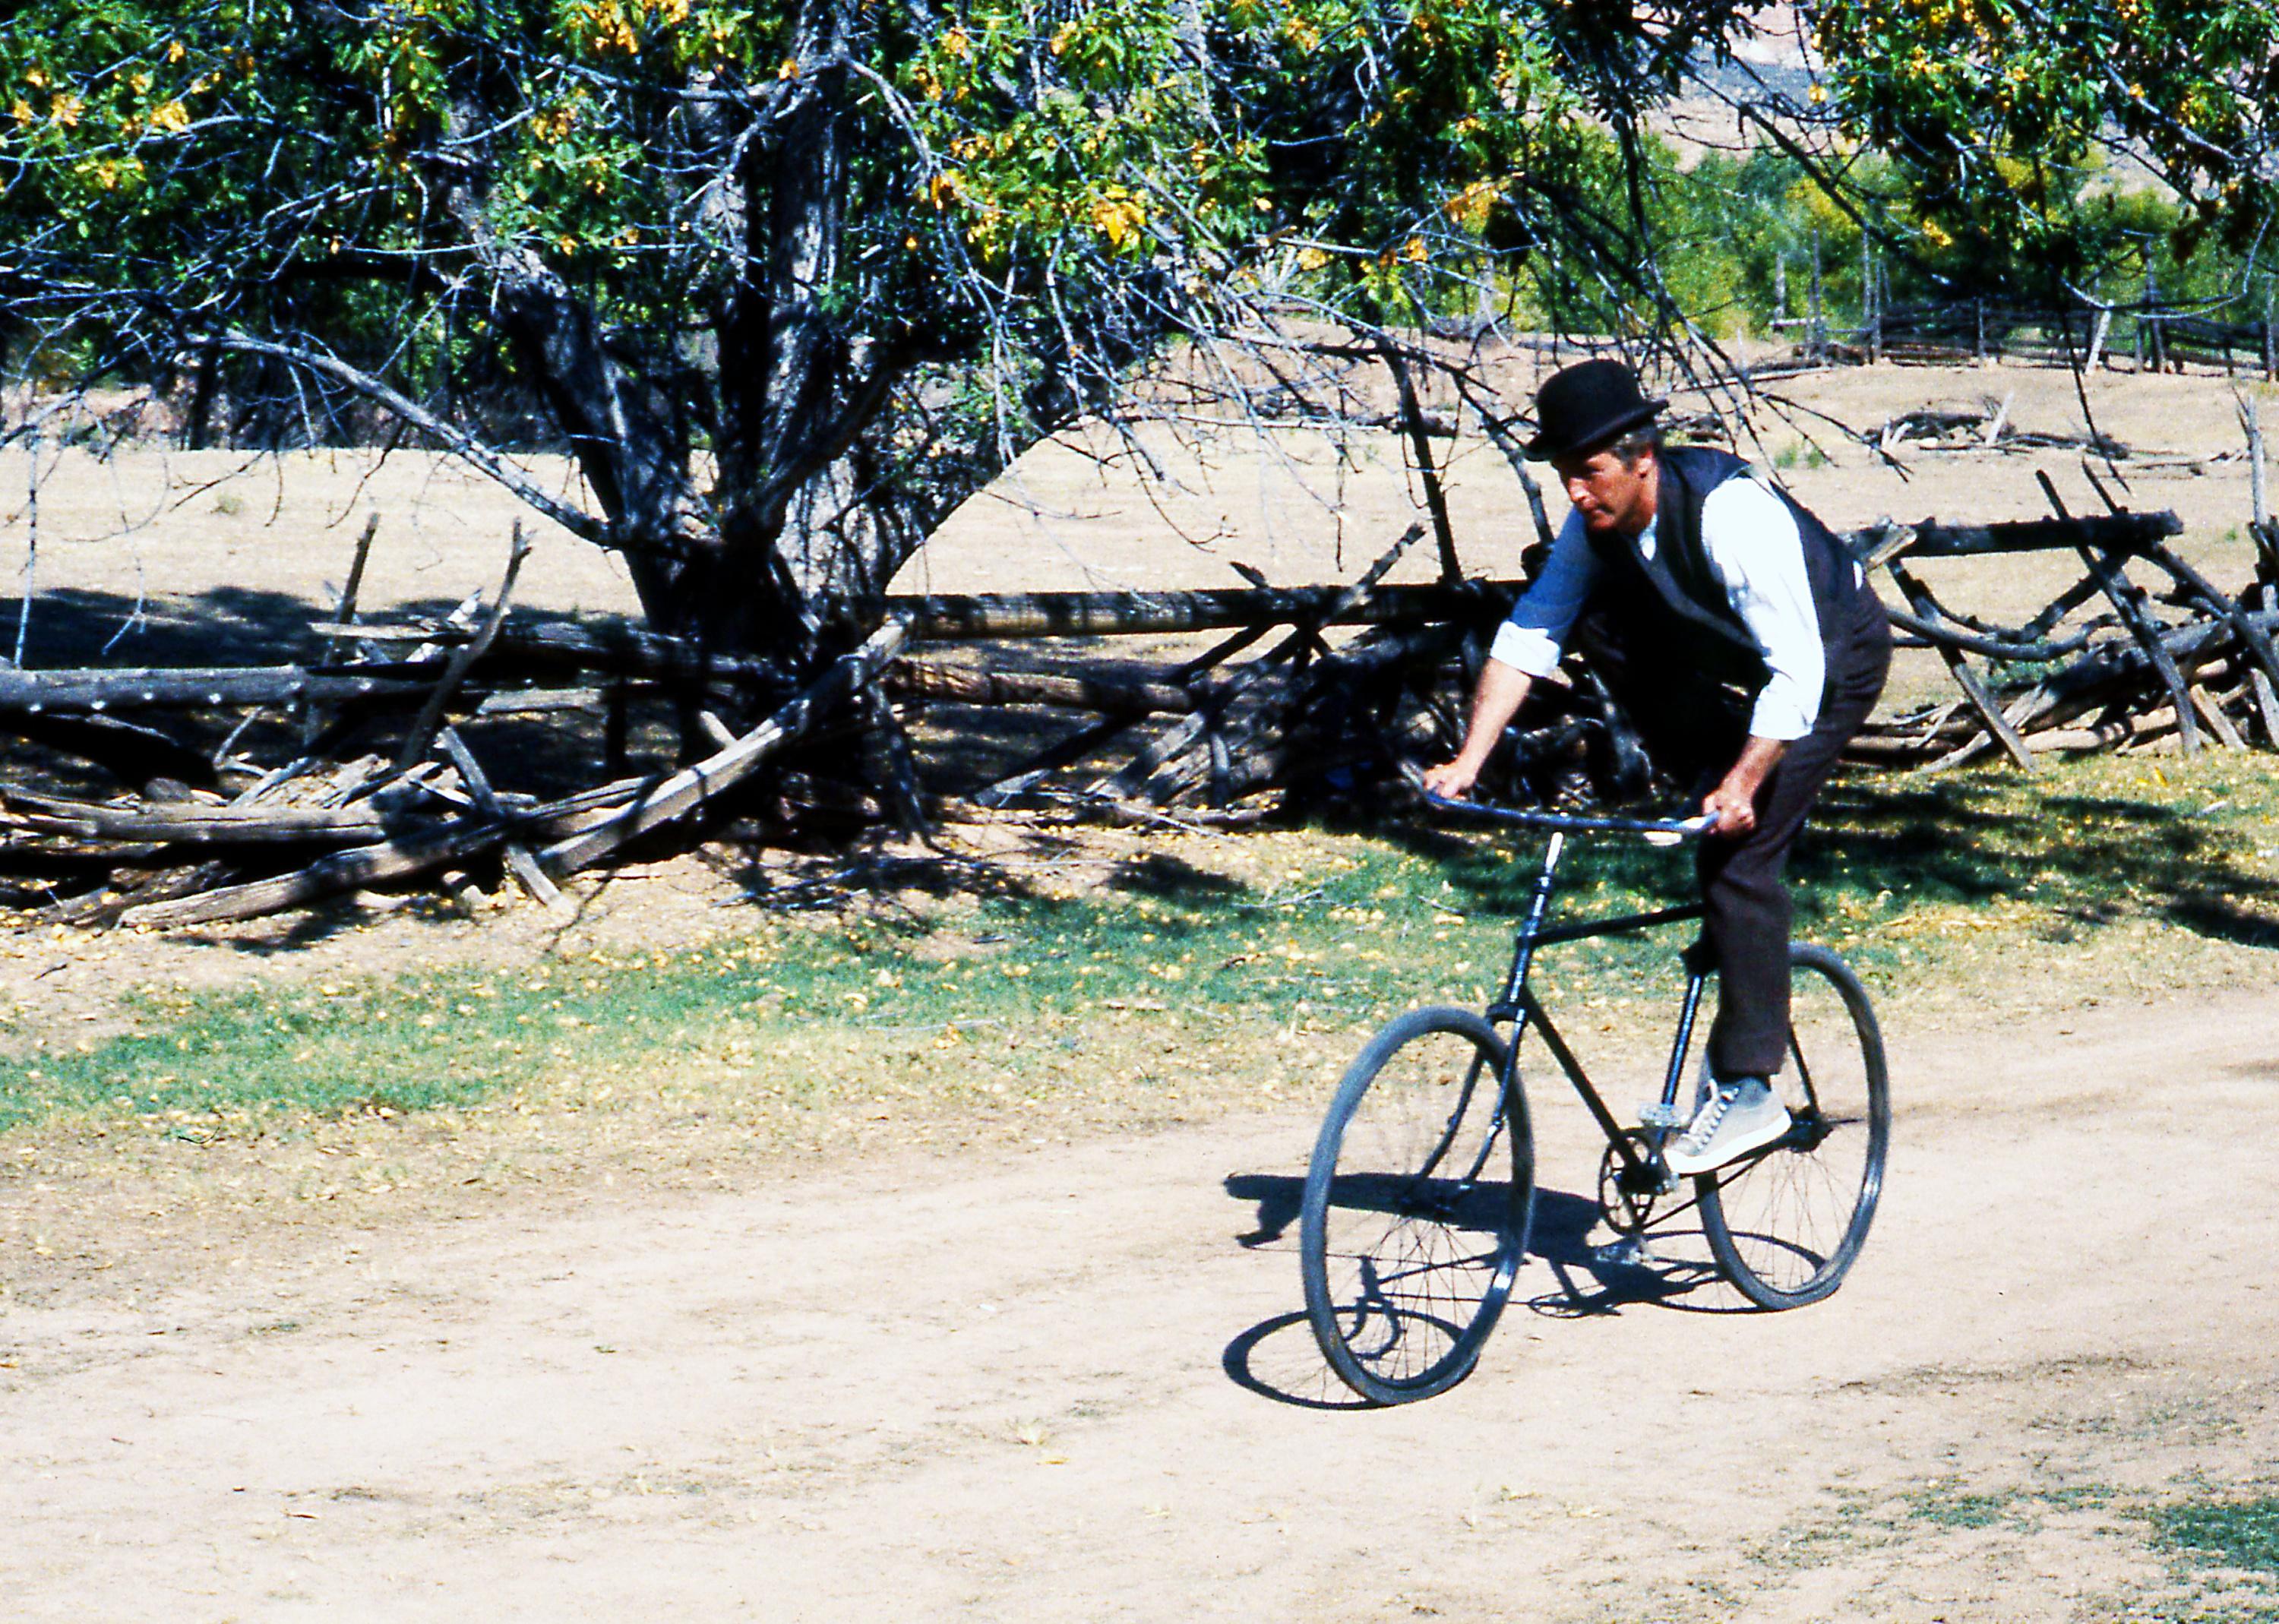 Paul Newman on a bike as Butch Cassidy, in Butch Cassidy And The Sundance Kid.